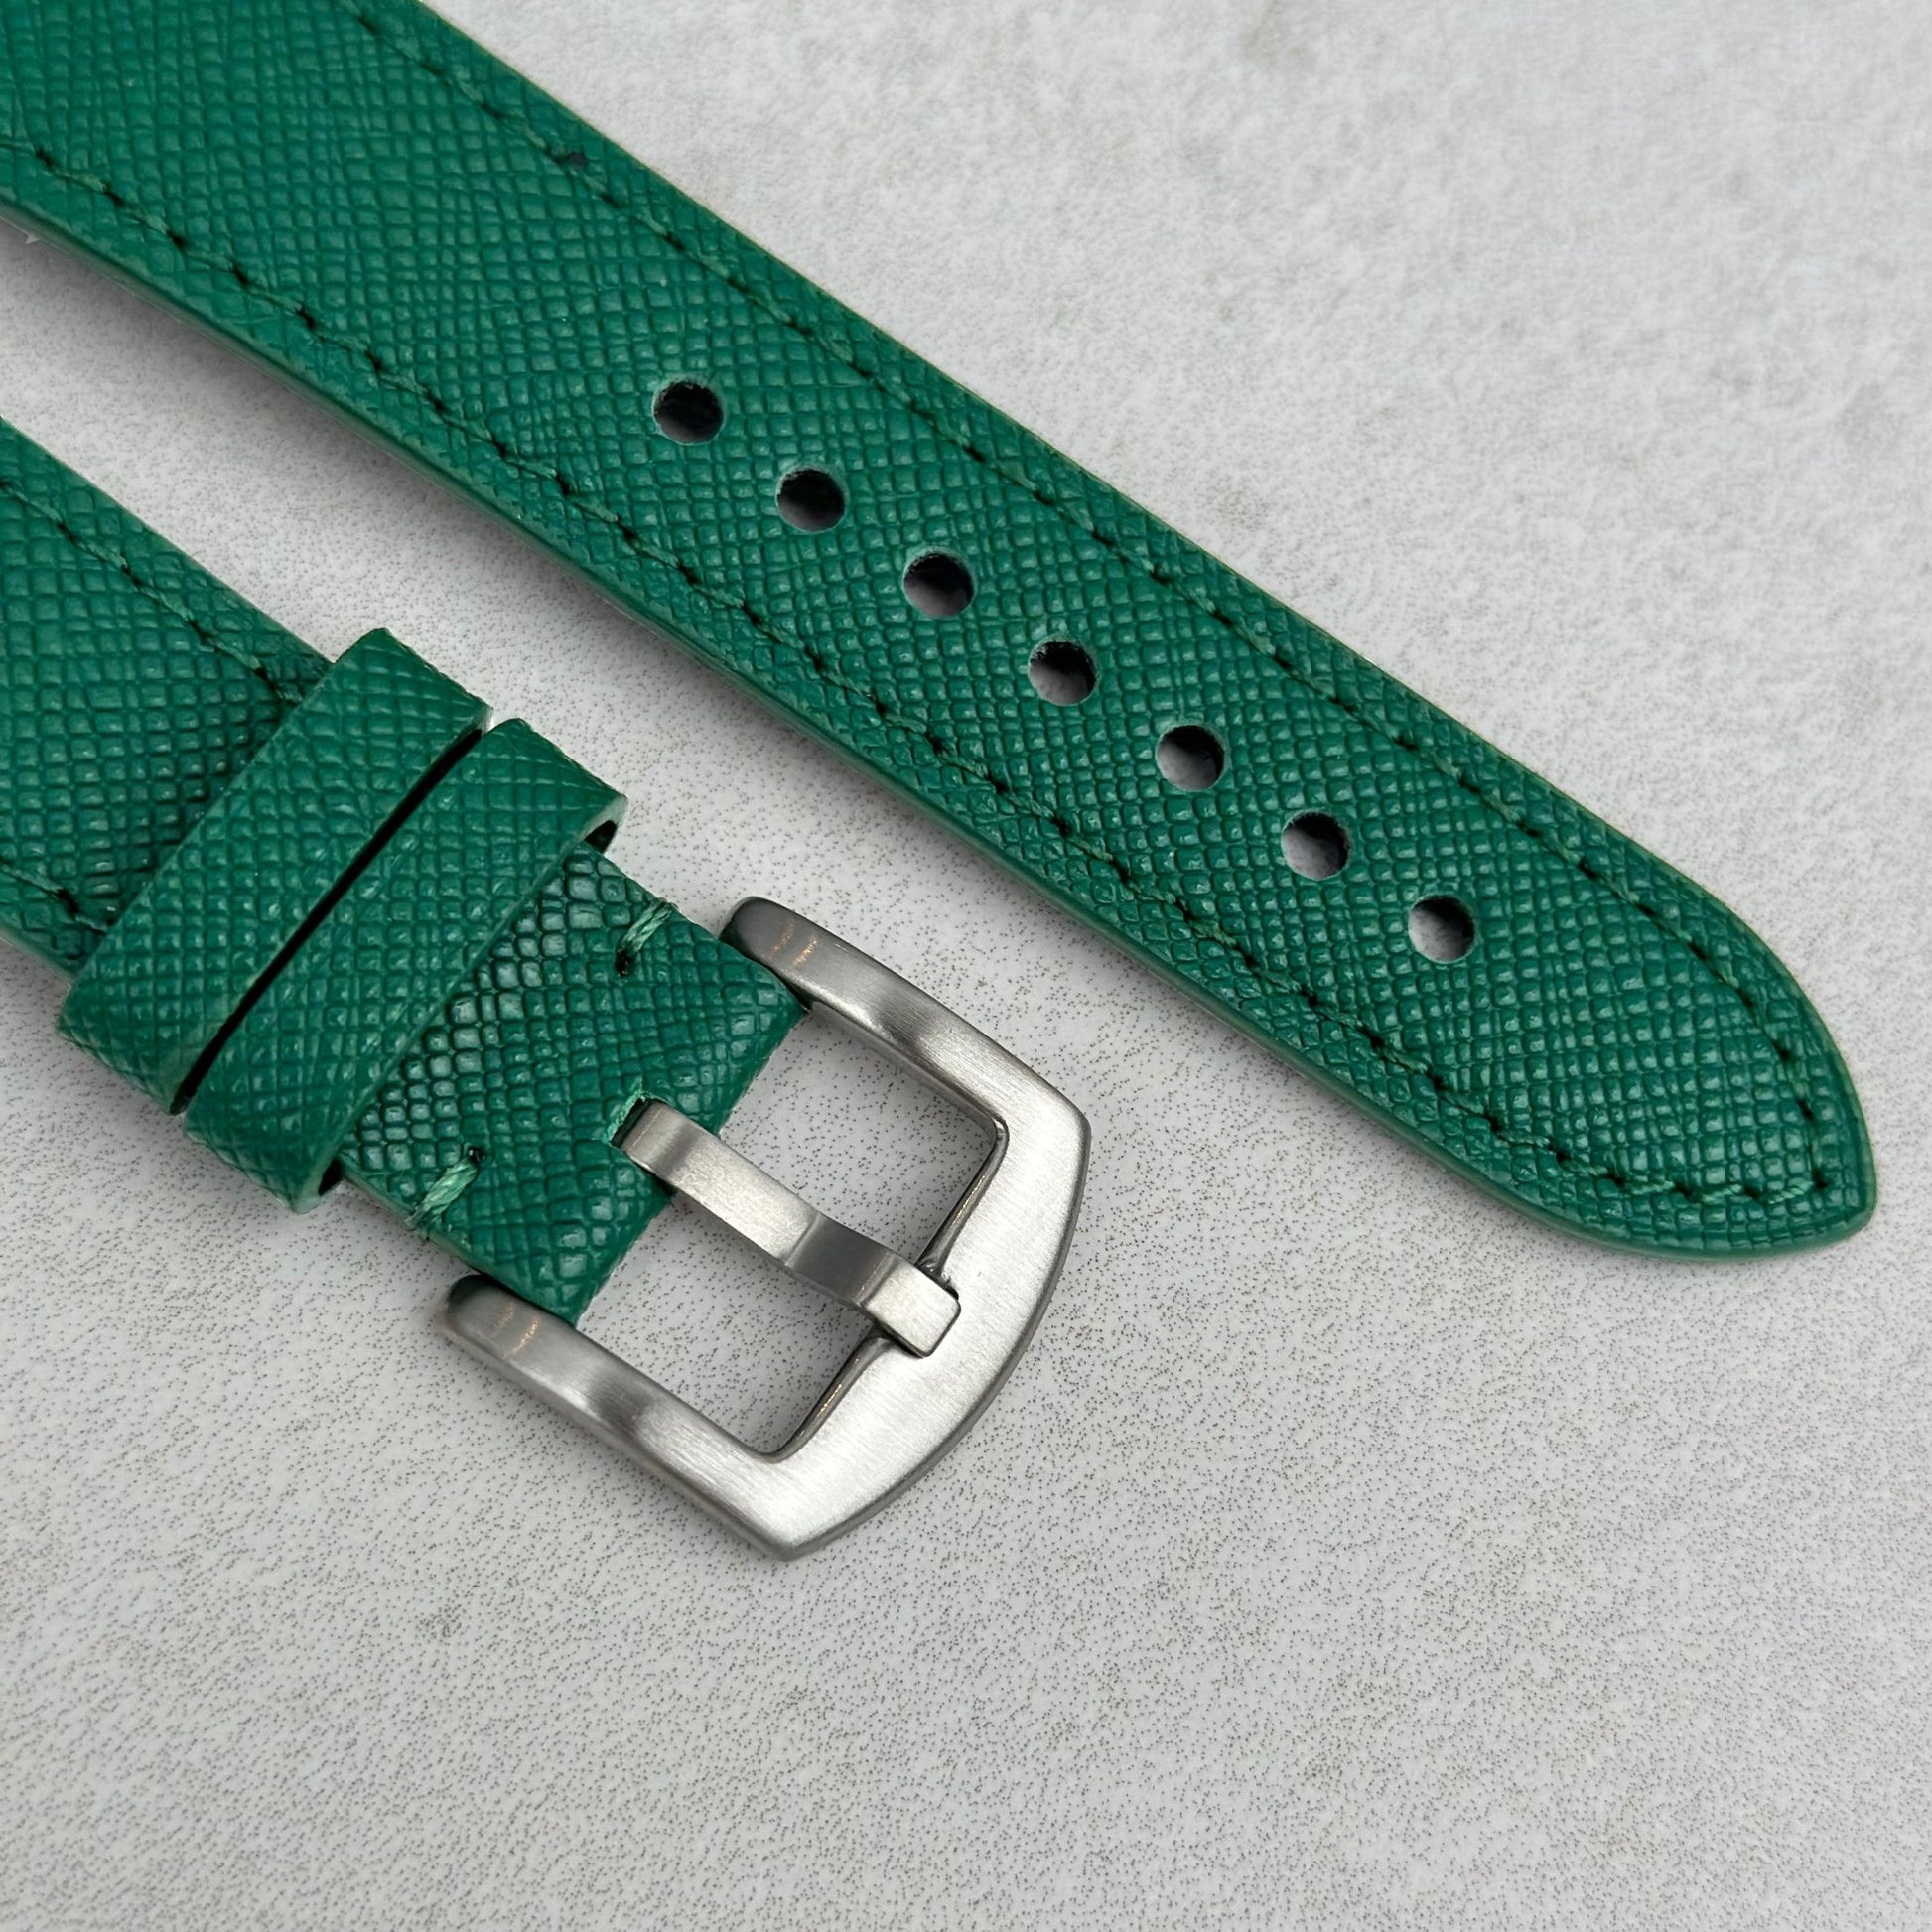 Brushed 316L stainless steel buckle on the Florence emerald green Saffiano leather watch strap.